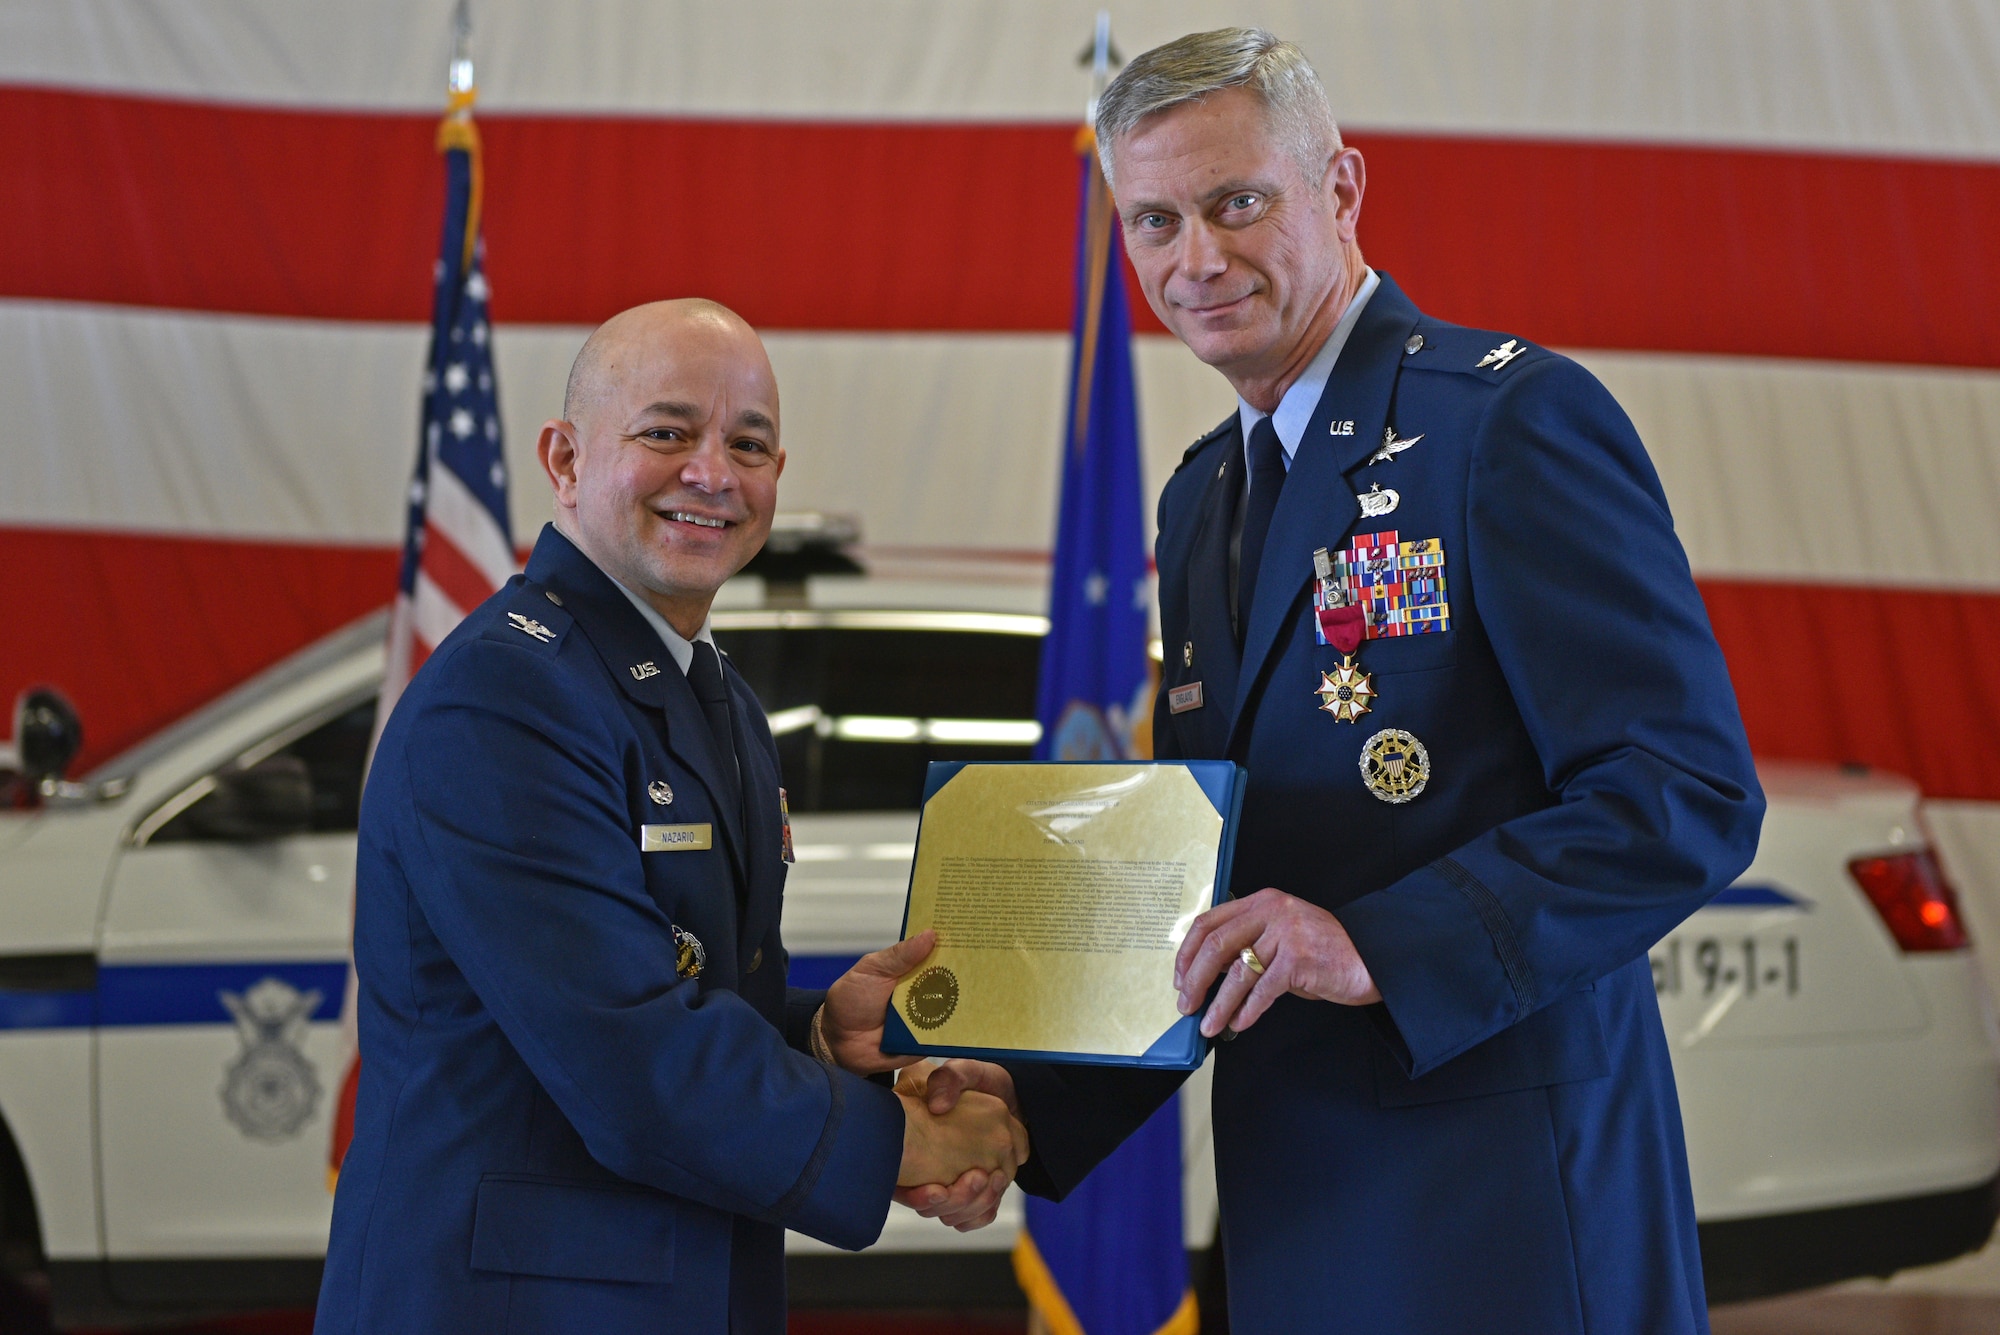 U.S. Air Force Col. Andres Nazario, 17th Training Wing commander, presents Col. Tony England, outgoing 17th Mission Support Group commander, the Legion of Merit medal during the change of command ceremony on Goodfellow Air Force Base, Texas, June 23, 2021. England was decorated for his performance and leadership of the 17th MSG, which led to the 17th MSG winning 25 Air Force and major command level awards. (U.S. Air Force photo by Senior Airman Ashley Thrash)